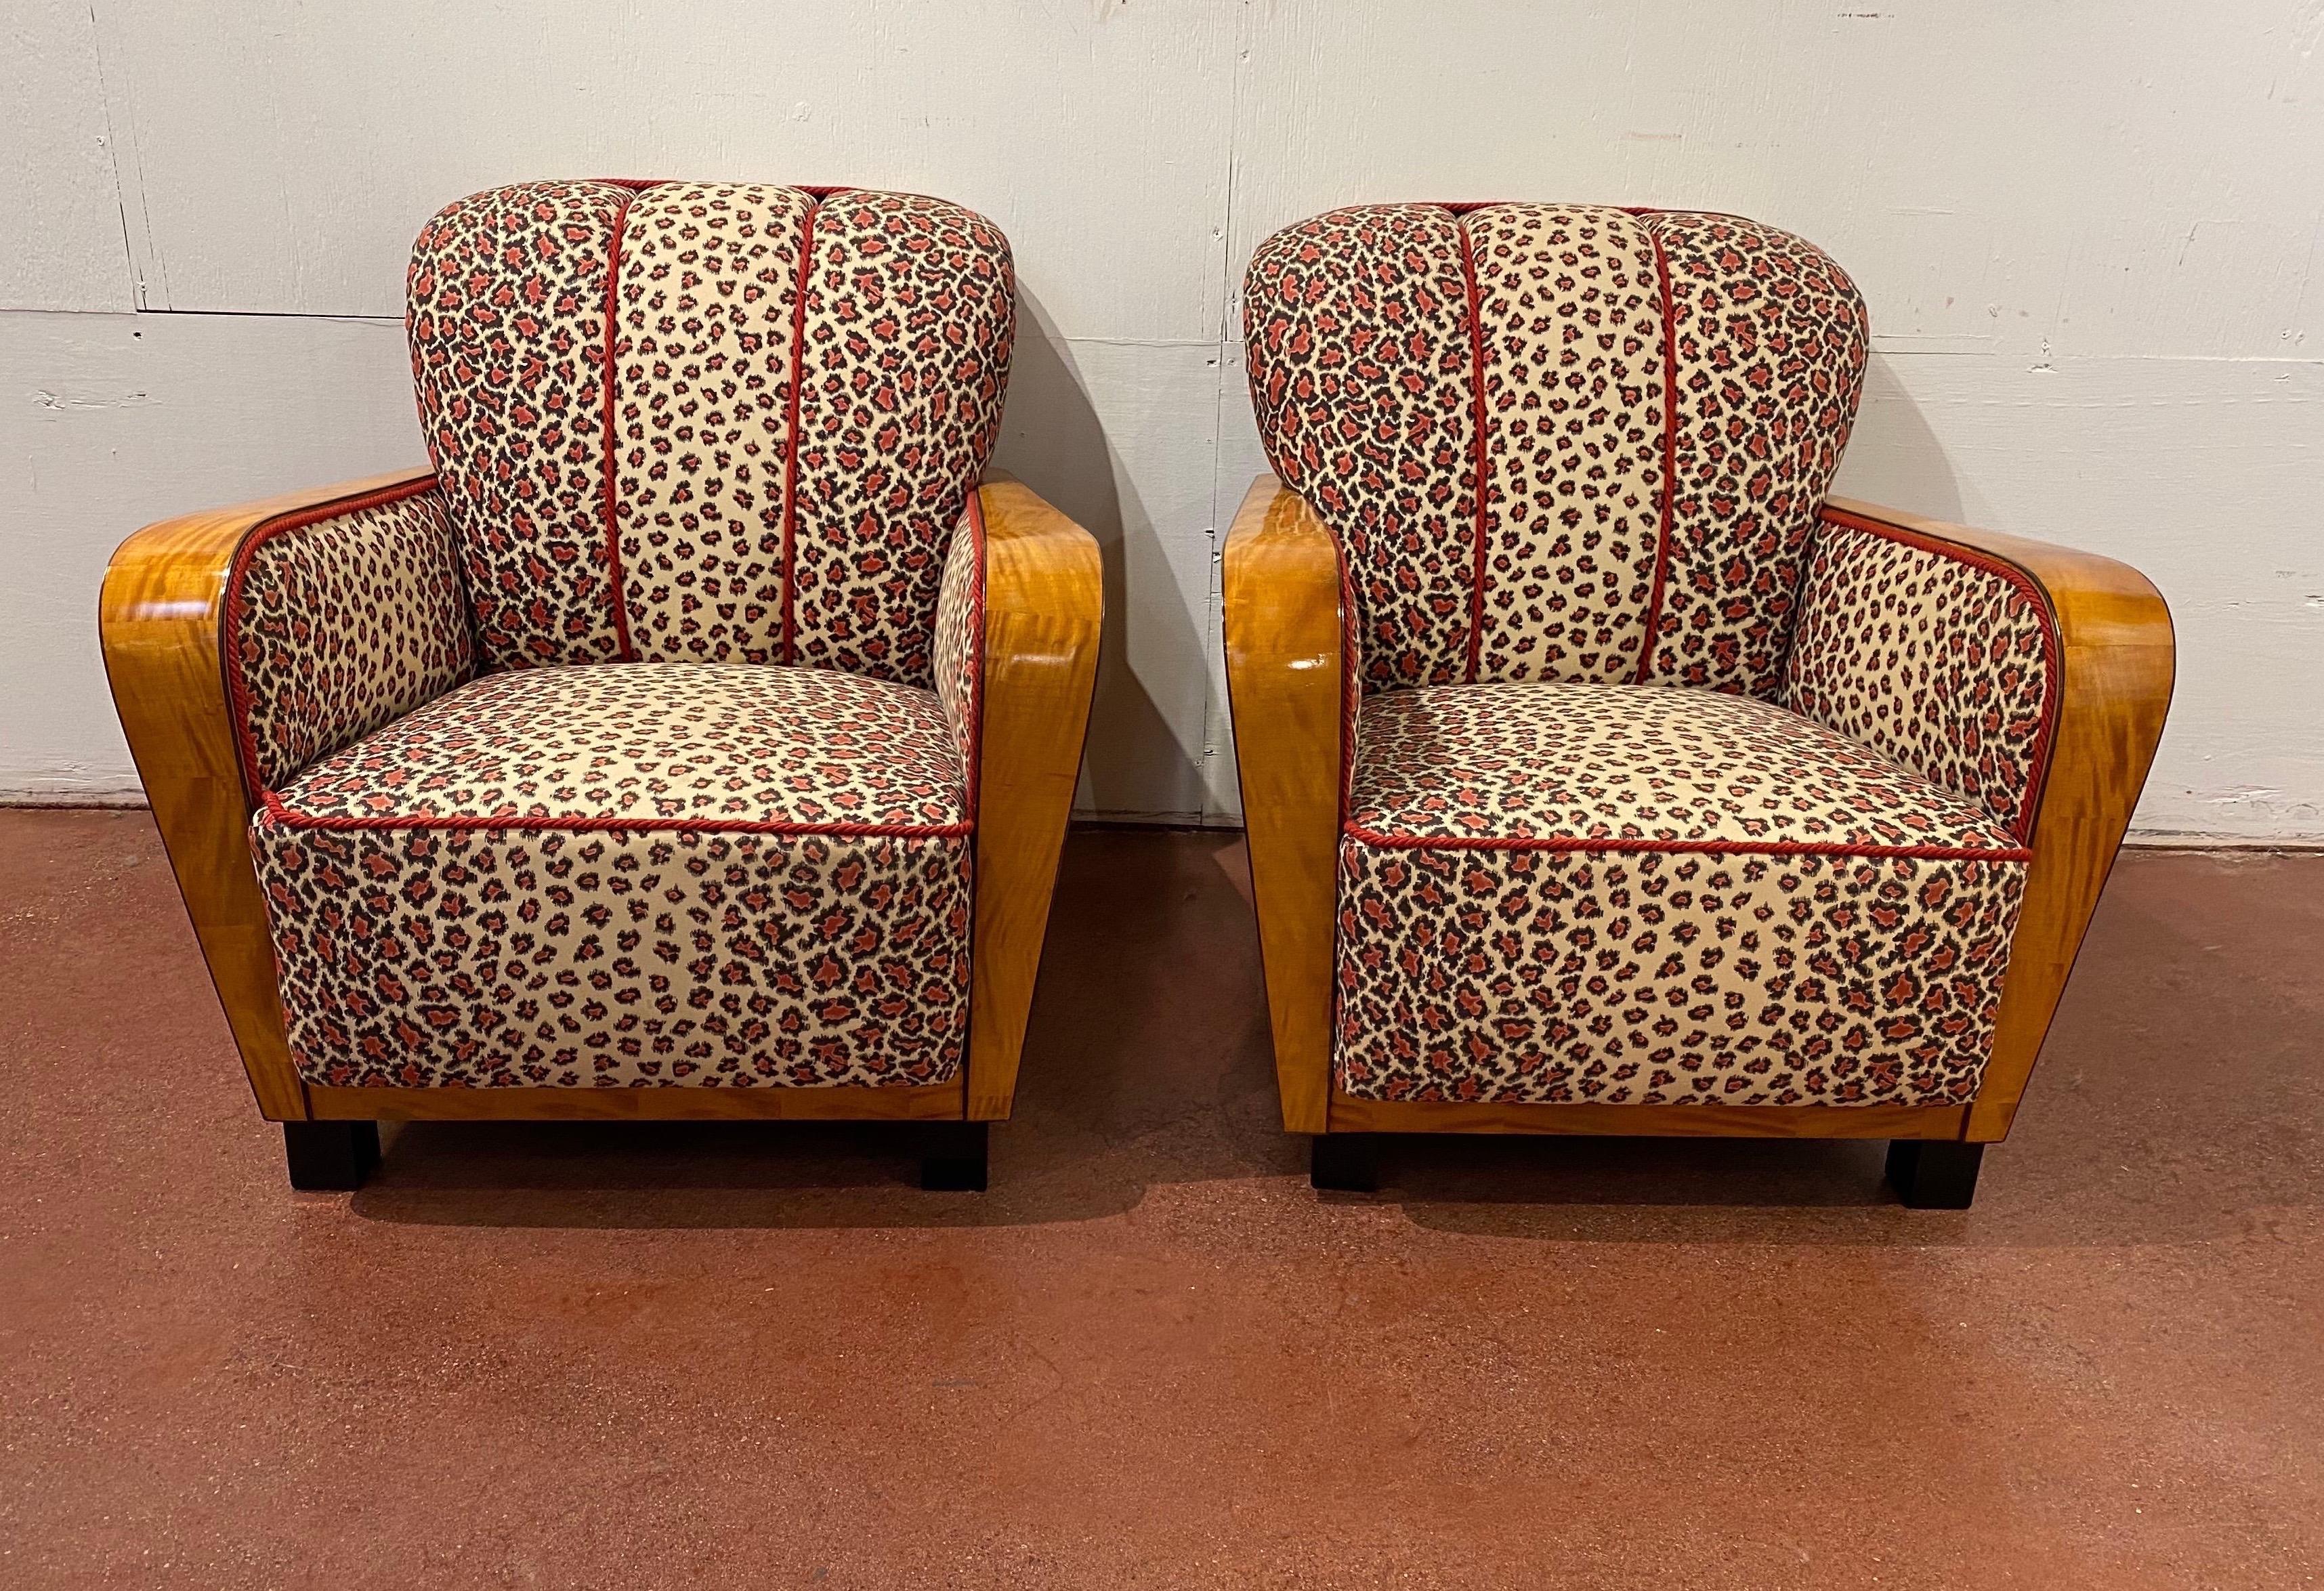 Incredible pair of Art Deco club chairs in satinwood and vintage leopard print upholstery. Wonderful quality satinwood veneer with ebony inlay. Chairs are in great shape and are stunning in person.